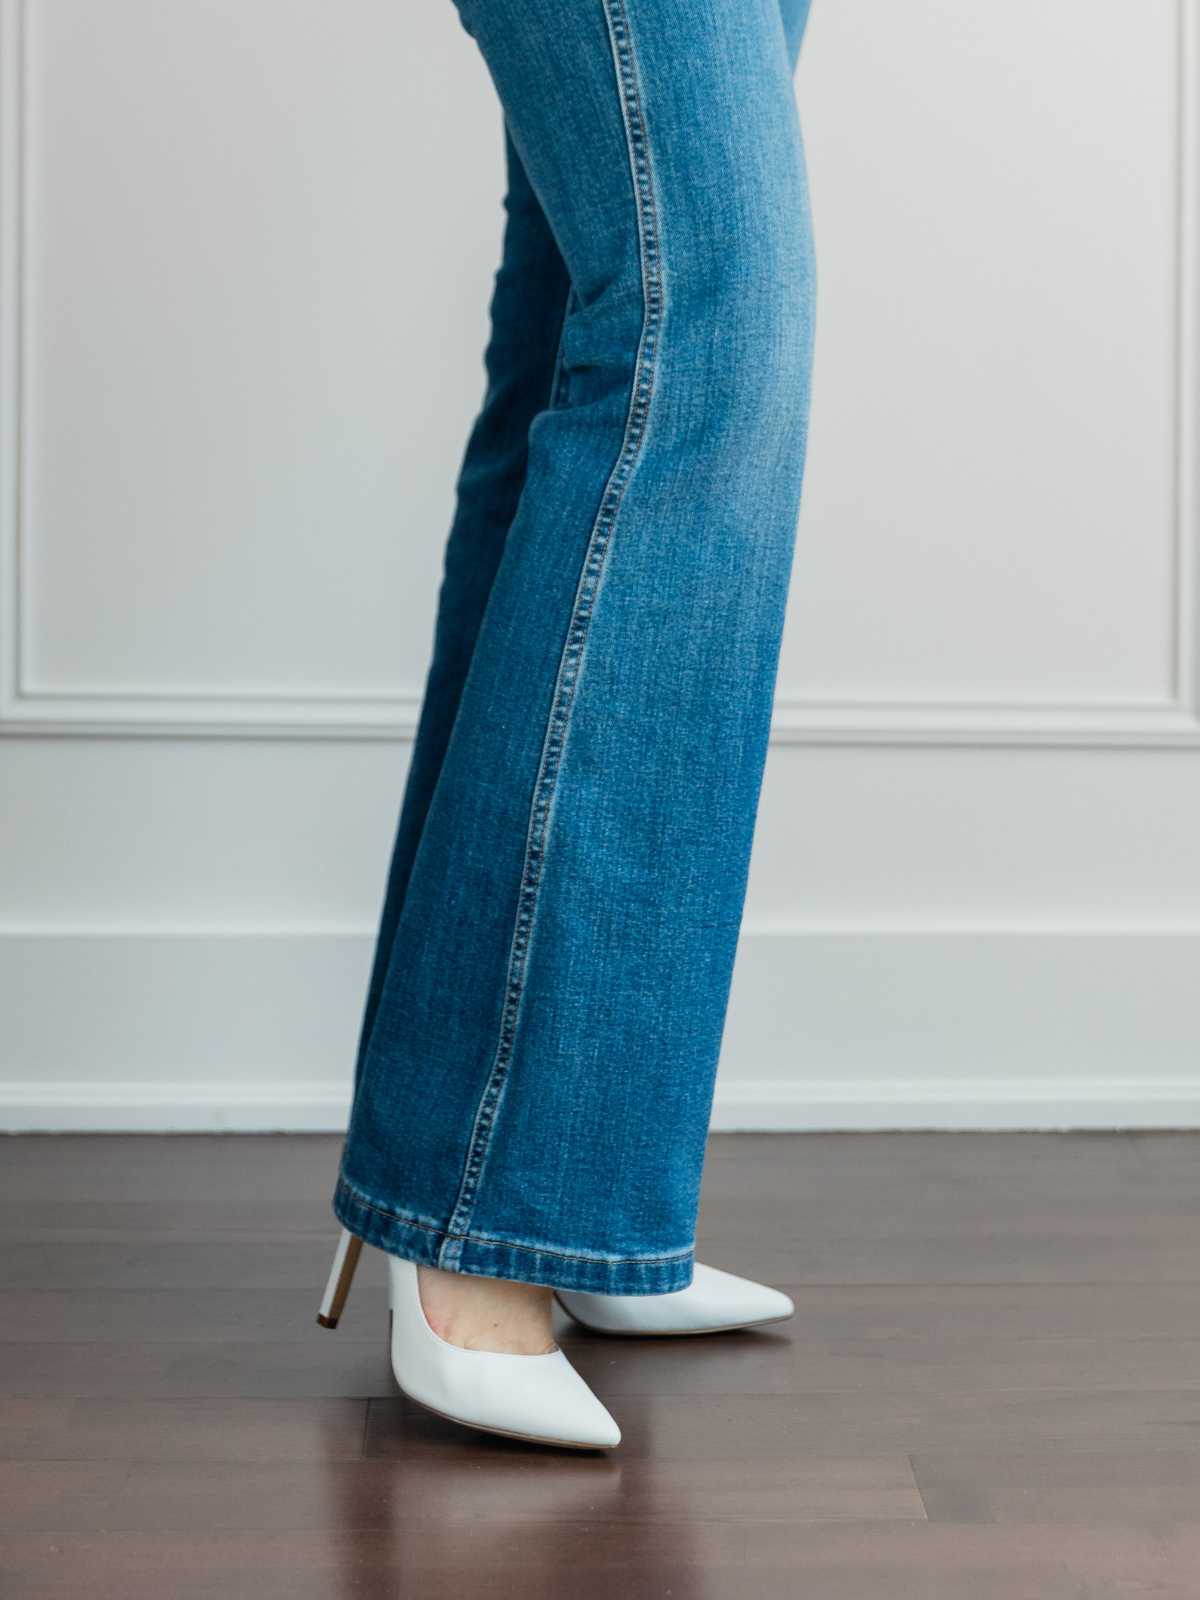 Cropped view of woman's legs wearing  white pumps with full length blue flare jeans.